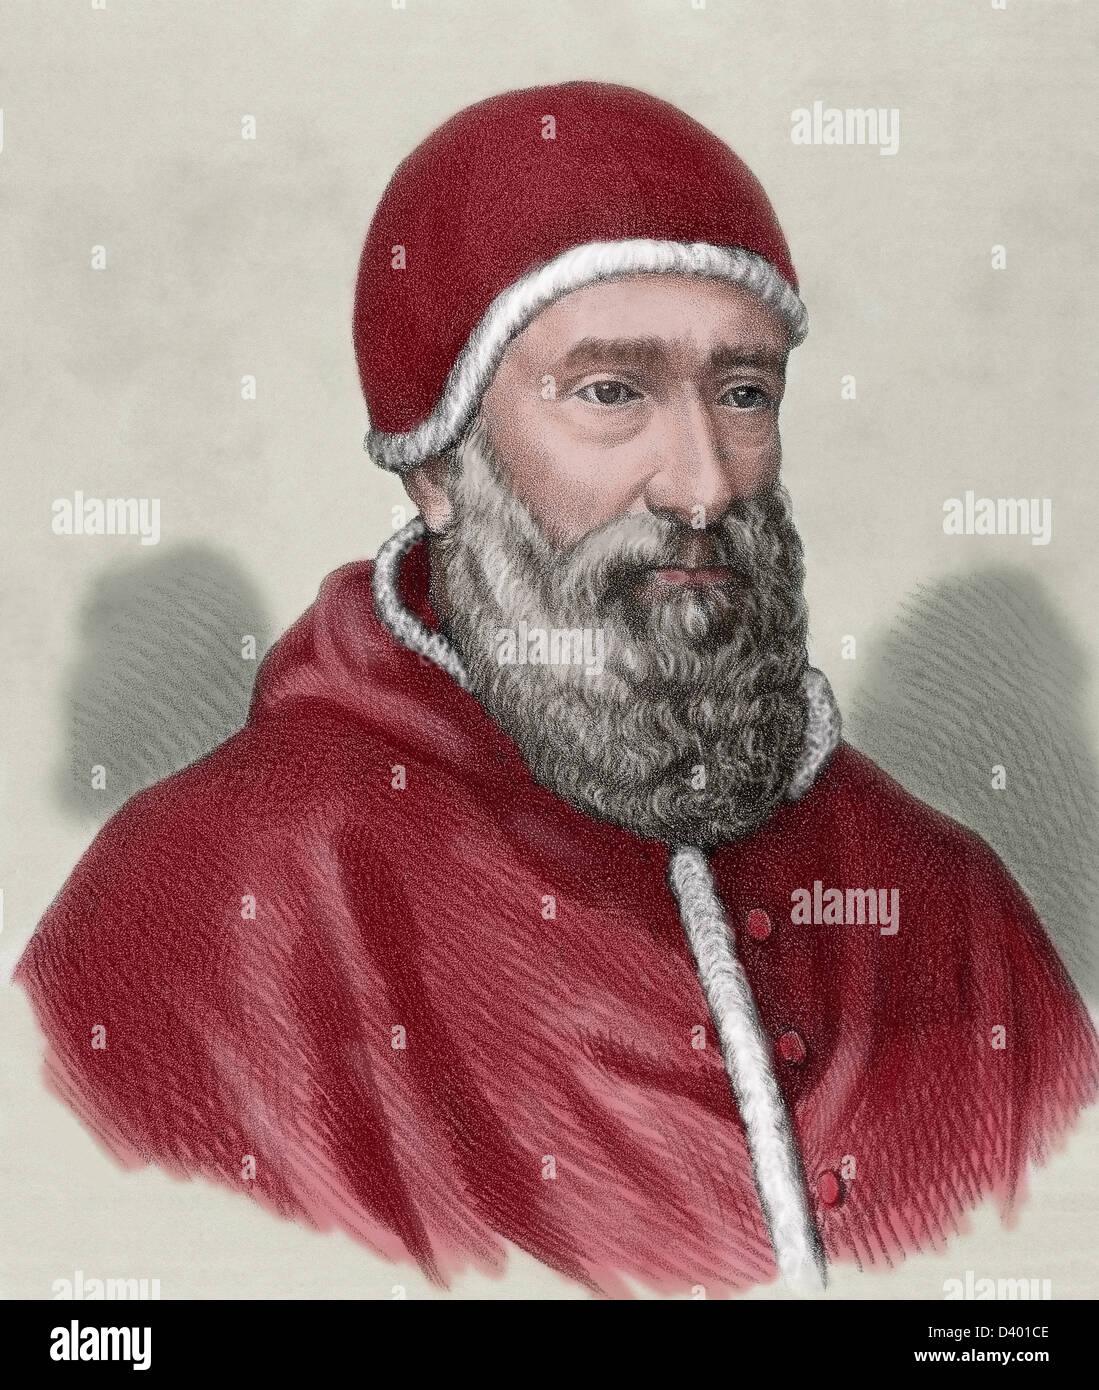 Clement VII (1478–1534), born Giulio di Giuliano de Medici. Cardinal from 1513 to 1523 and Pope from 1523 to 1534. Stock Photo